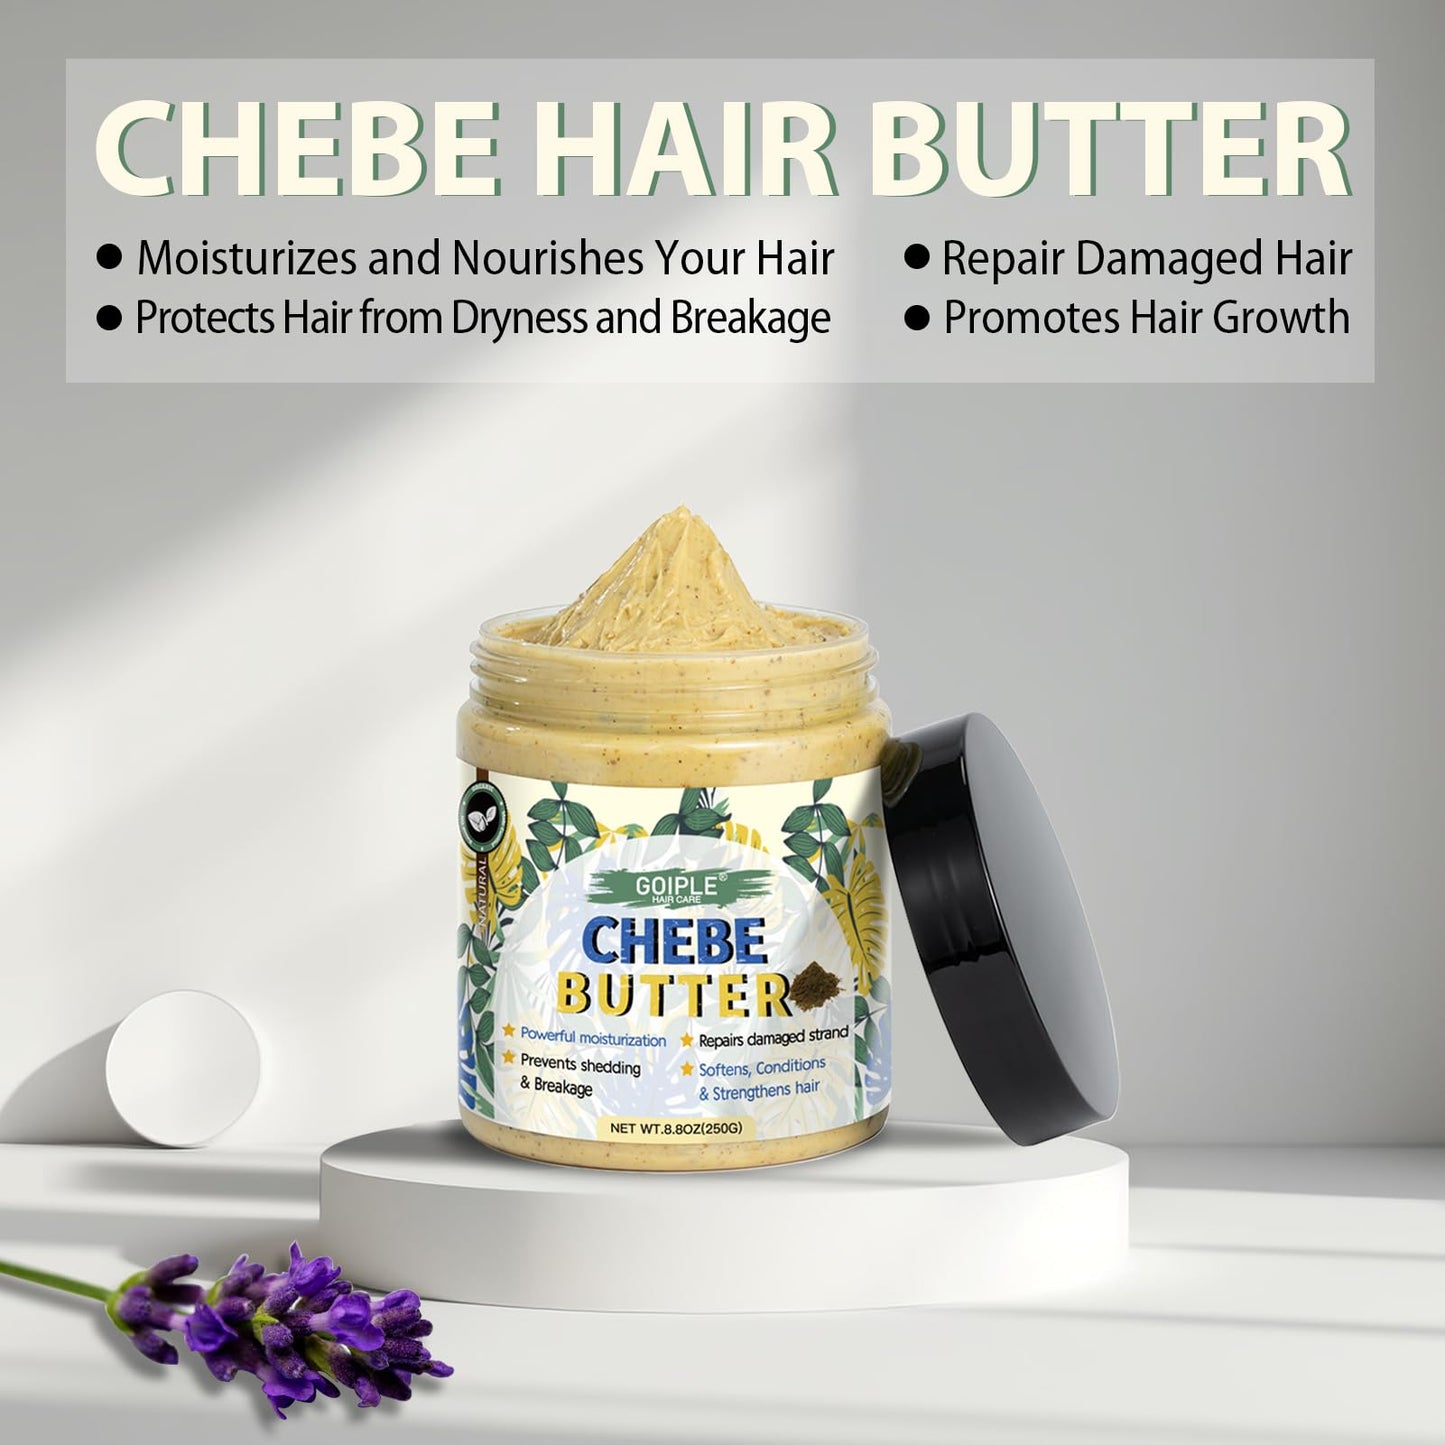 WOZUTUNT 8.8 oz Chebe Butter For Hair Growth Chebe Hair Butter Grease For Hair Men, Women, Chebe Butter for Hair Thickening, Chebe Hair Growth Butter Deep Moisturization For Healthy Hair Growth